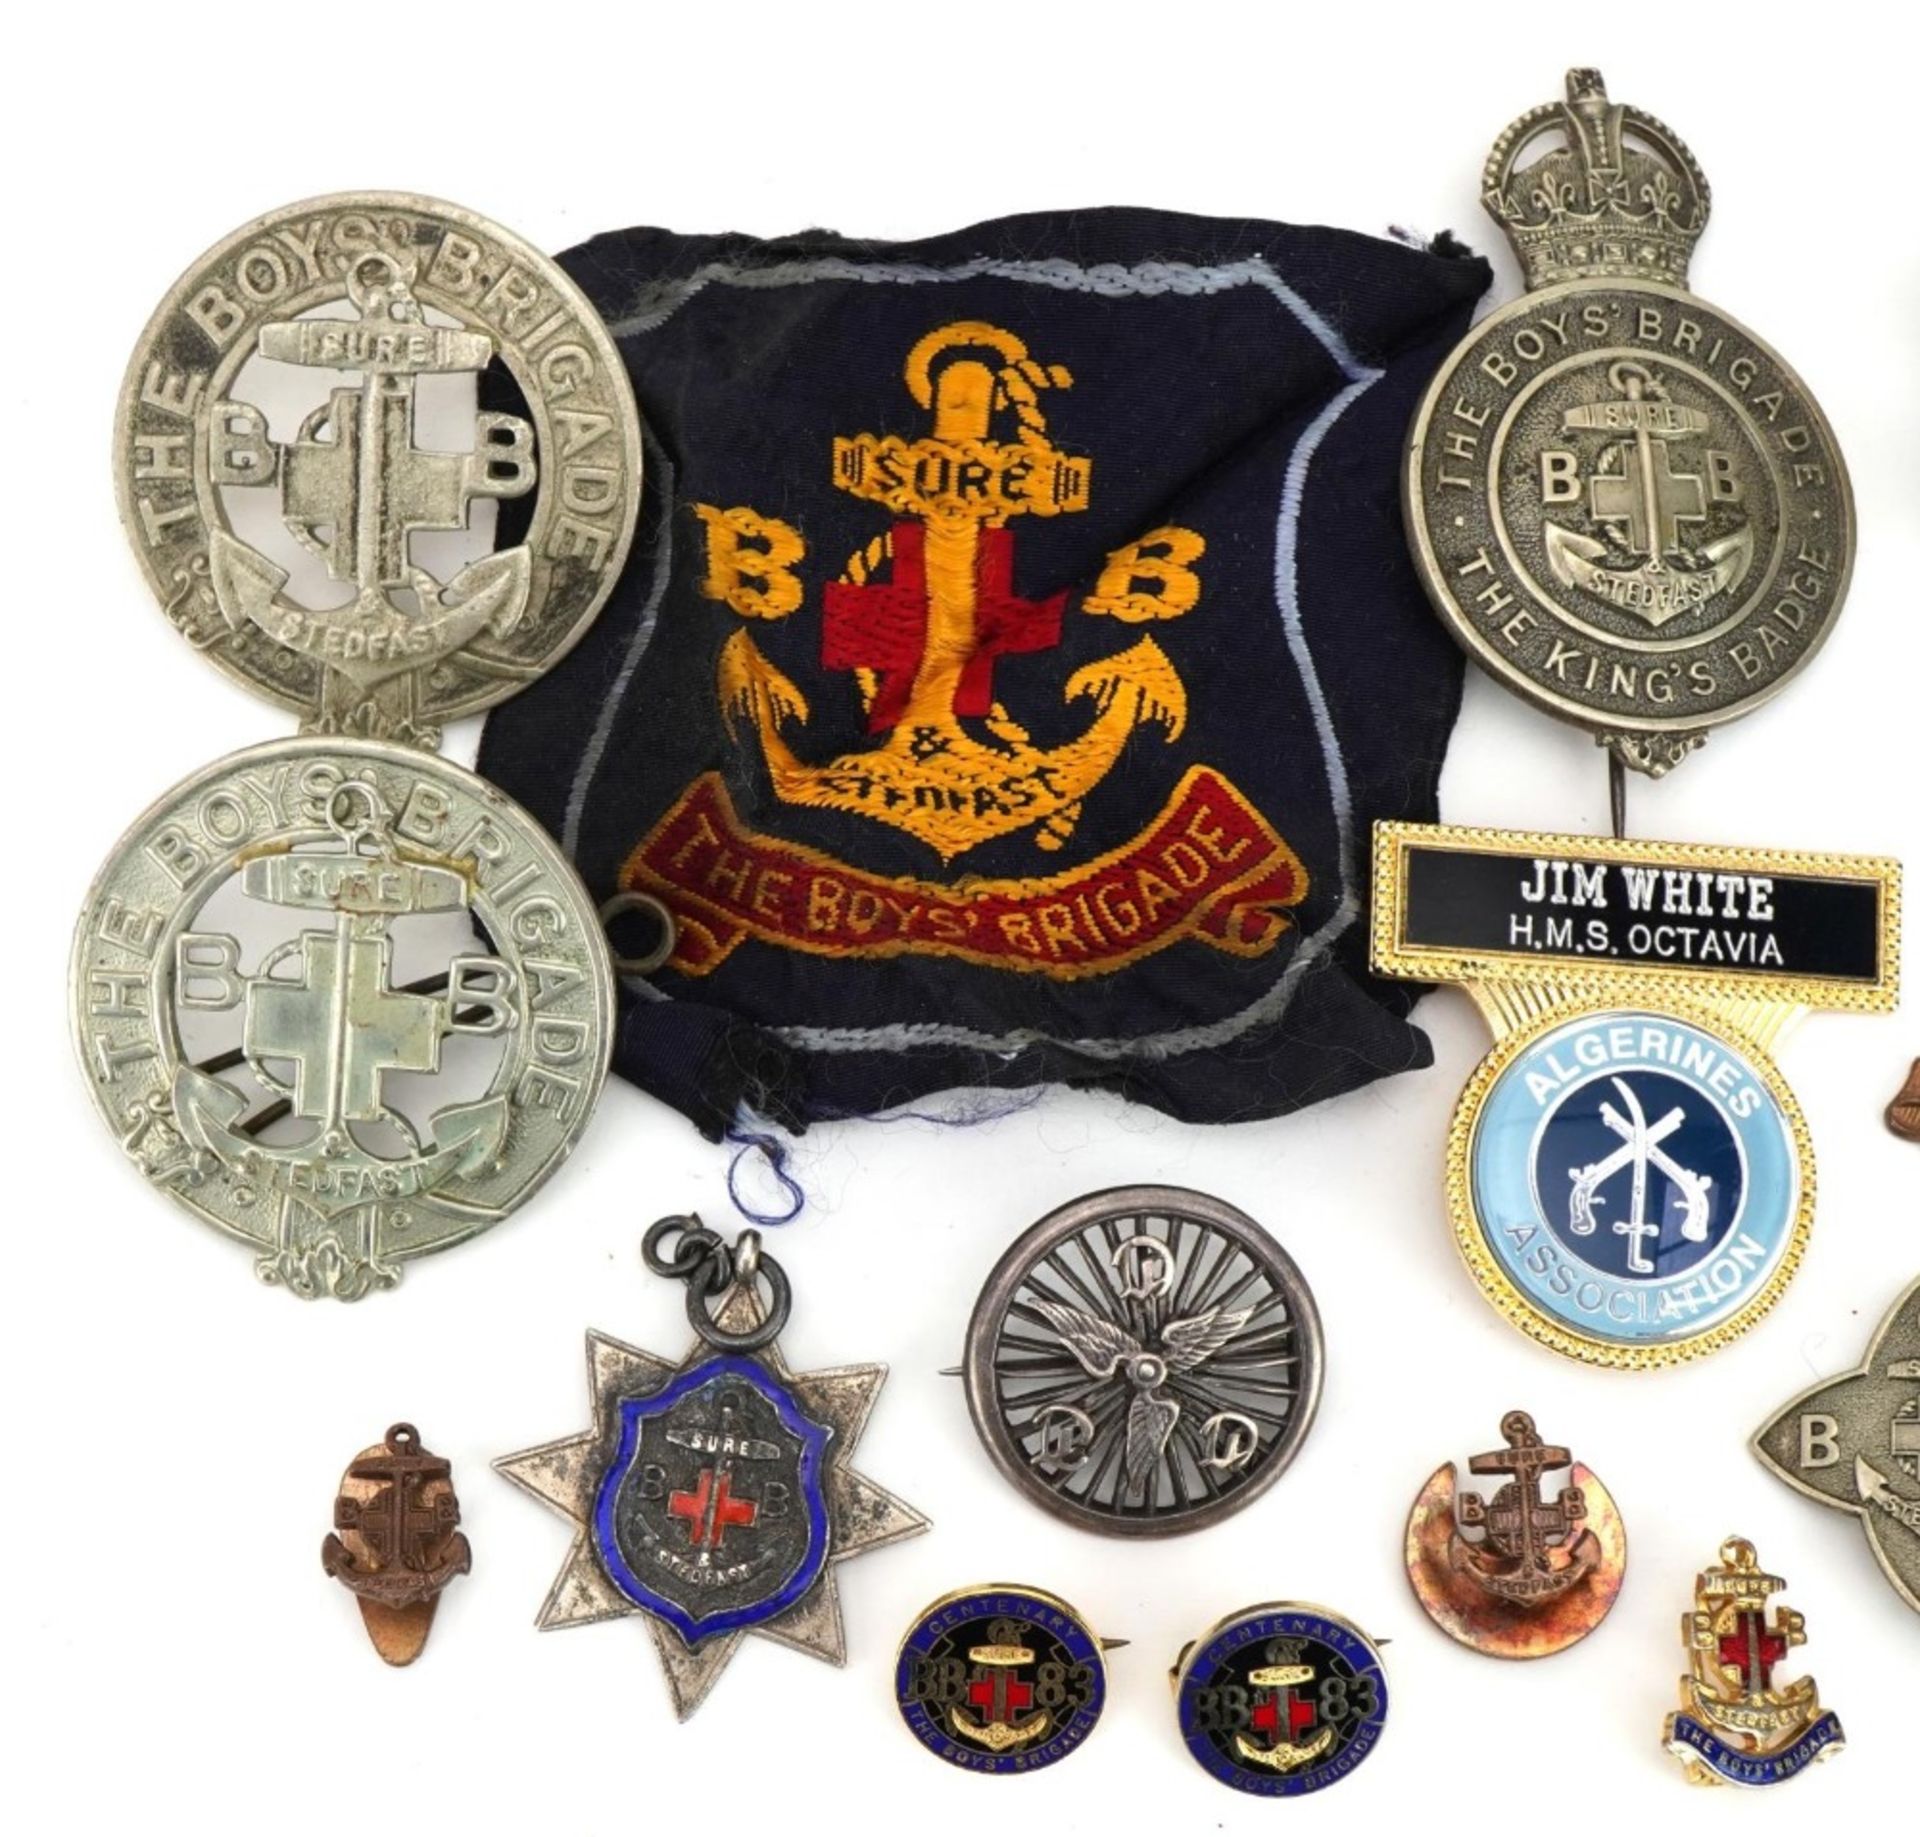 Predominantly Boy's Brigade memorabilia including a silver and enamel jewel, badges and a cycling - Image 2 of 4